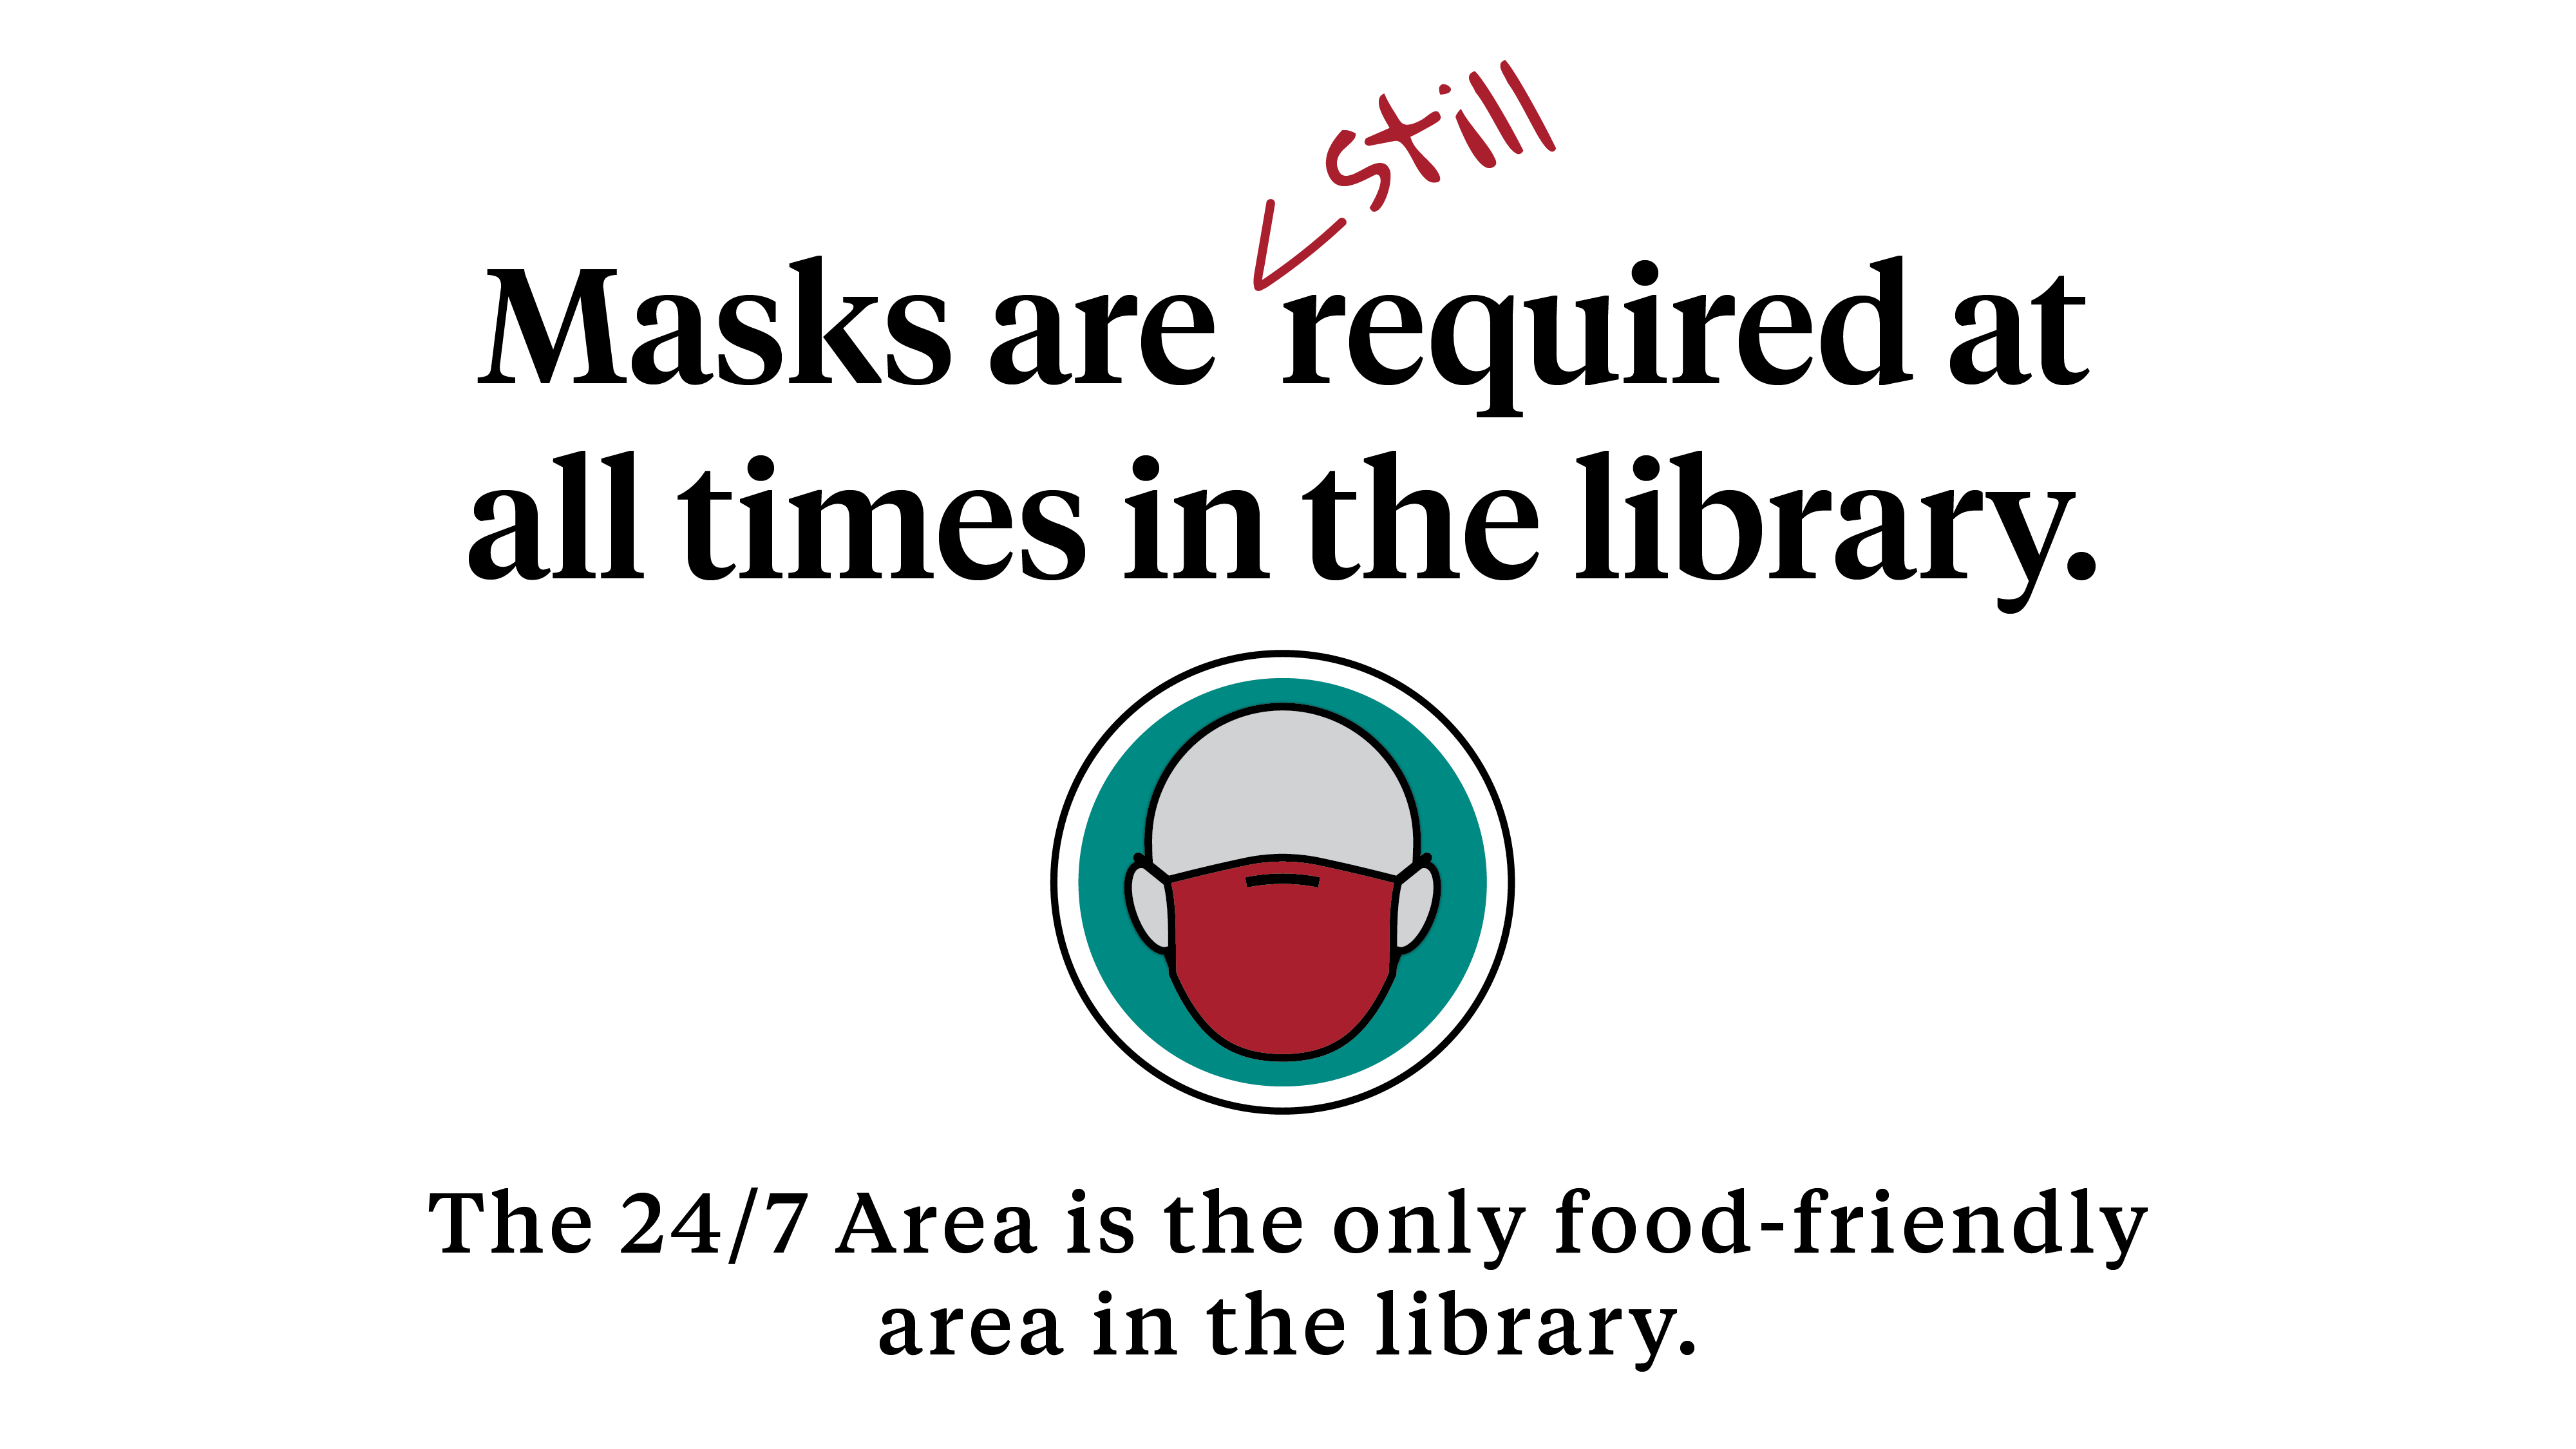 Masks are still required at all times in the library